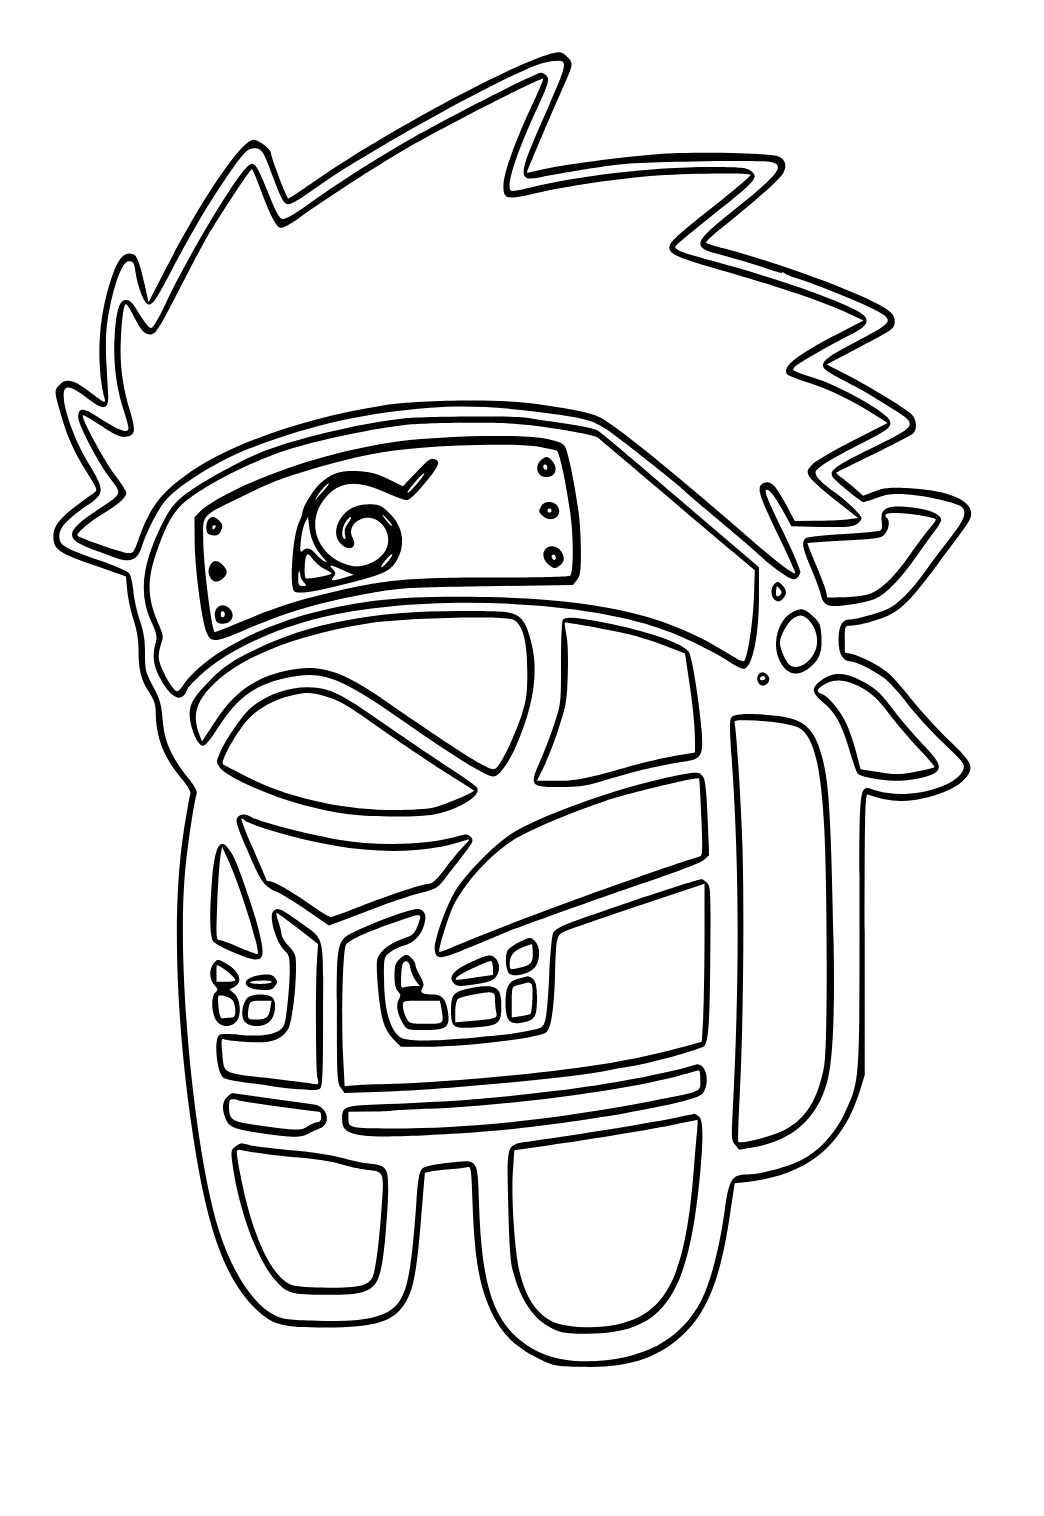 Free printable naruto among us coloring page sheet and picture for adults and kids girls and boys